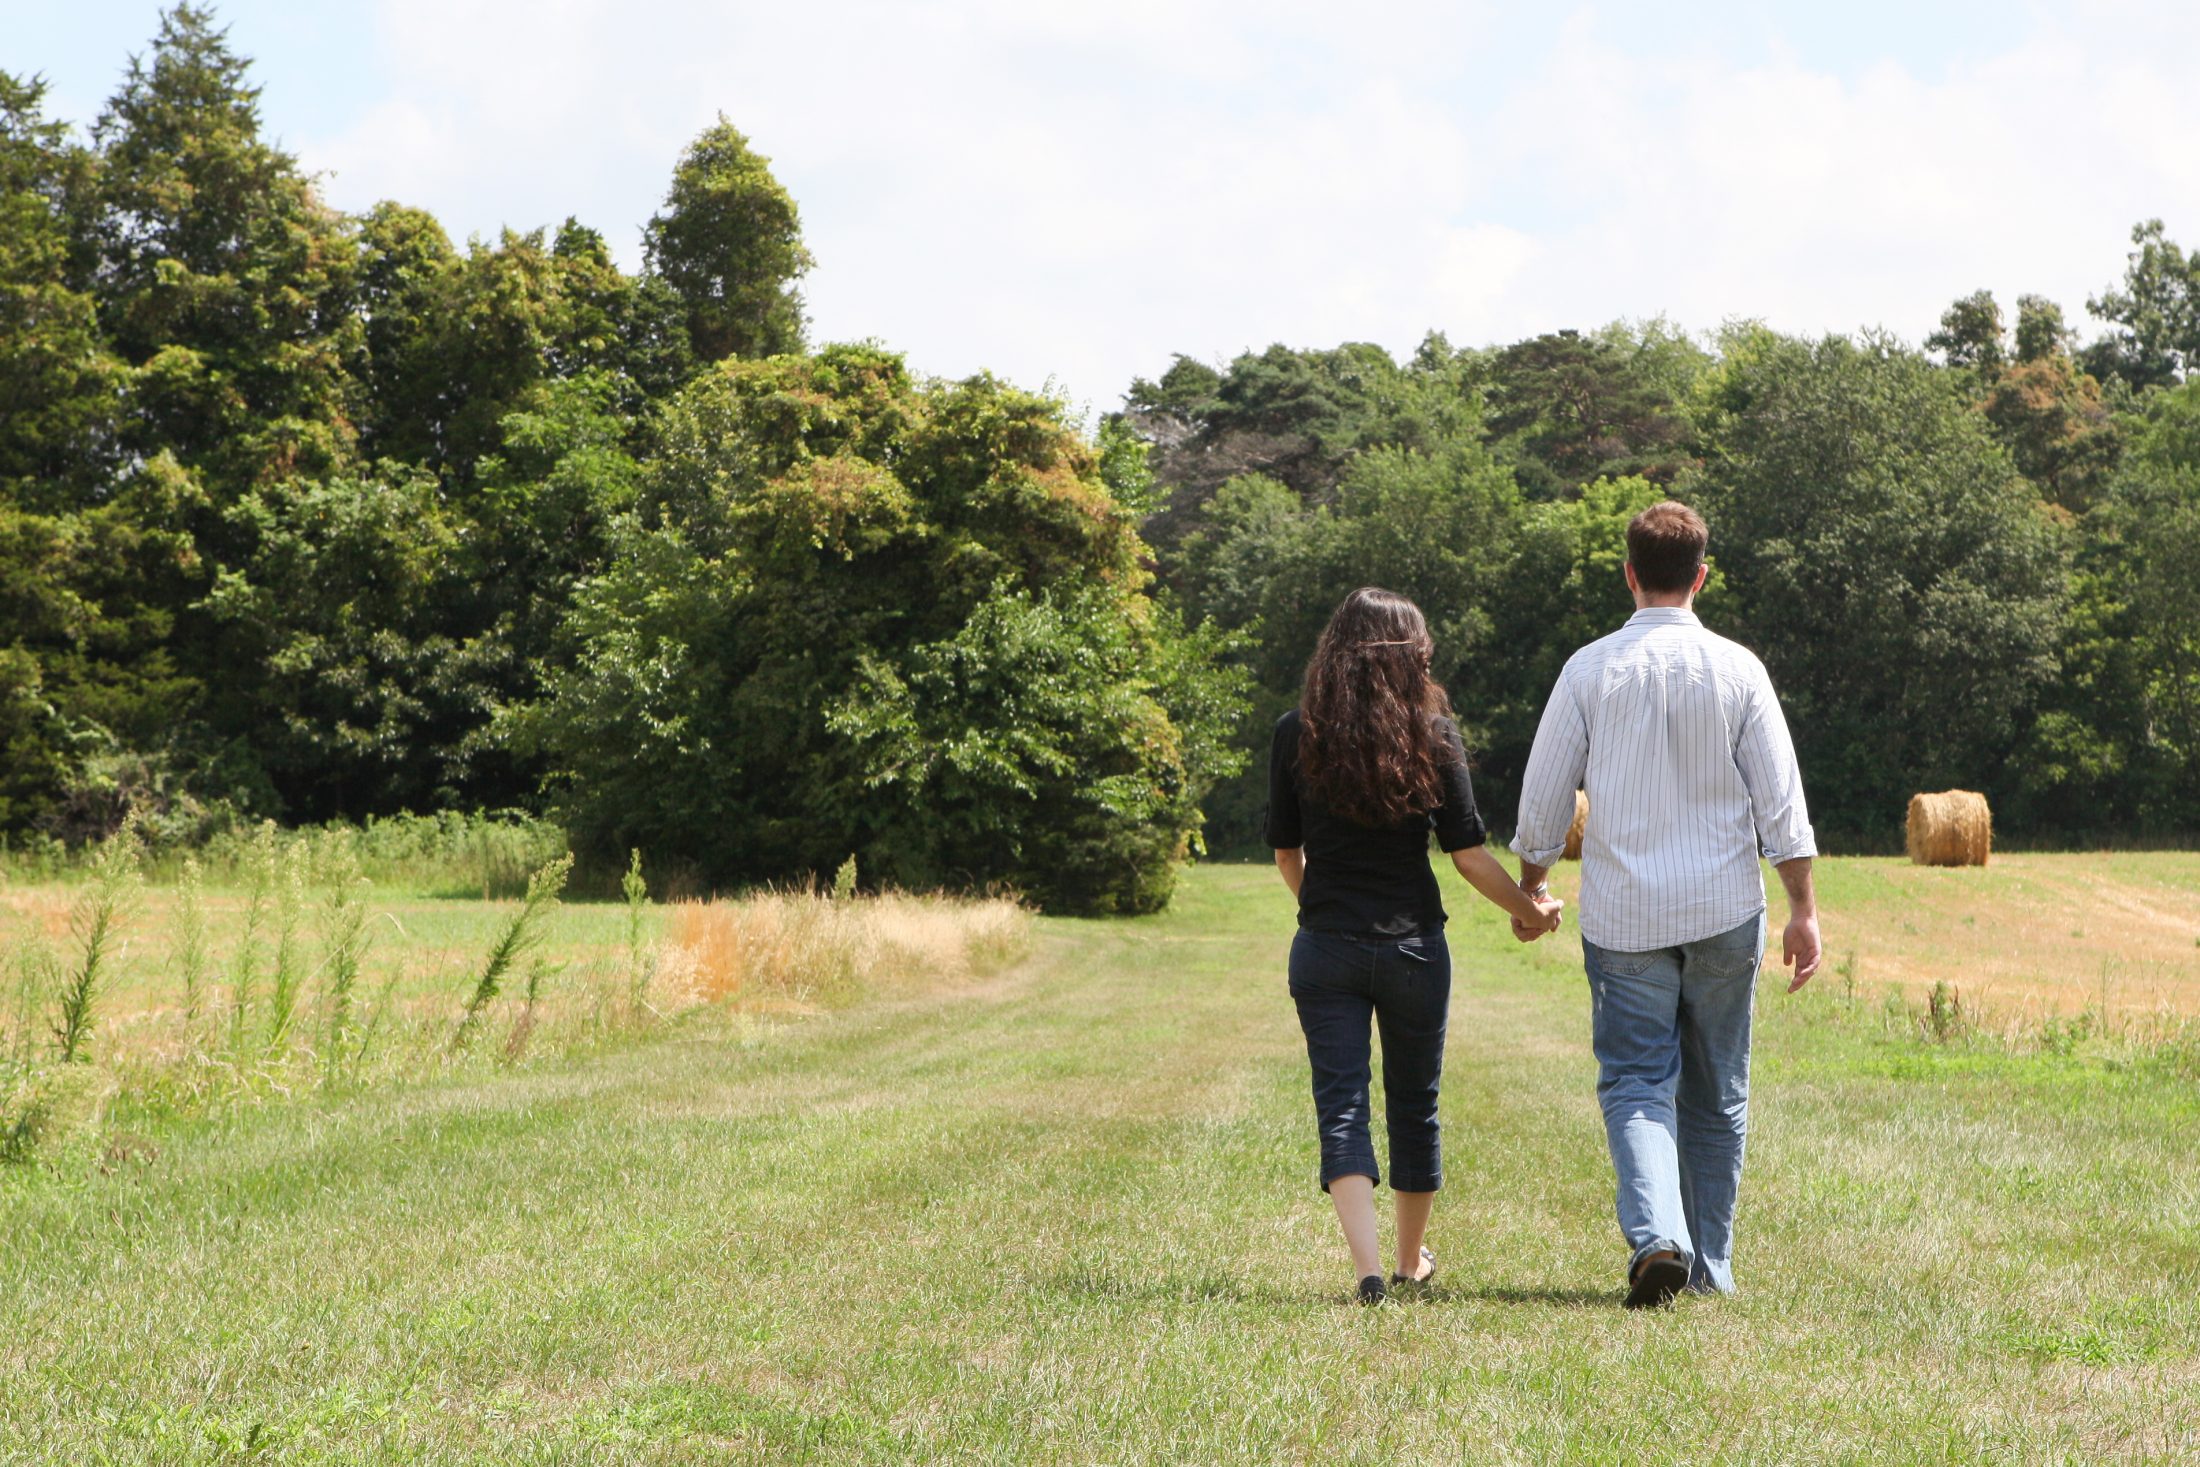 DC widow blog writer Marjorie Brimley walks away from camera in field holding hands with husband Shawn